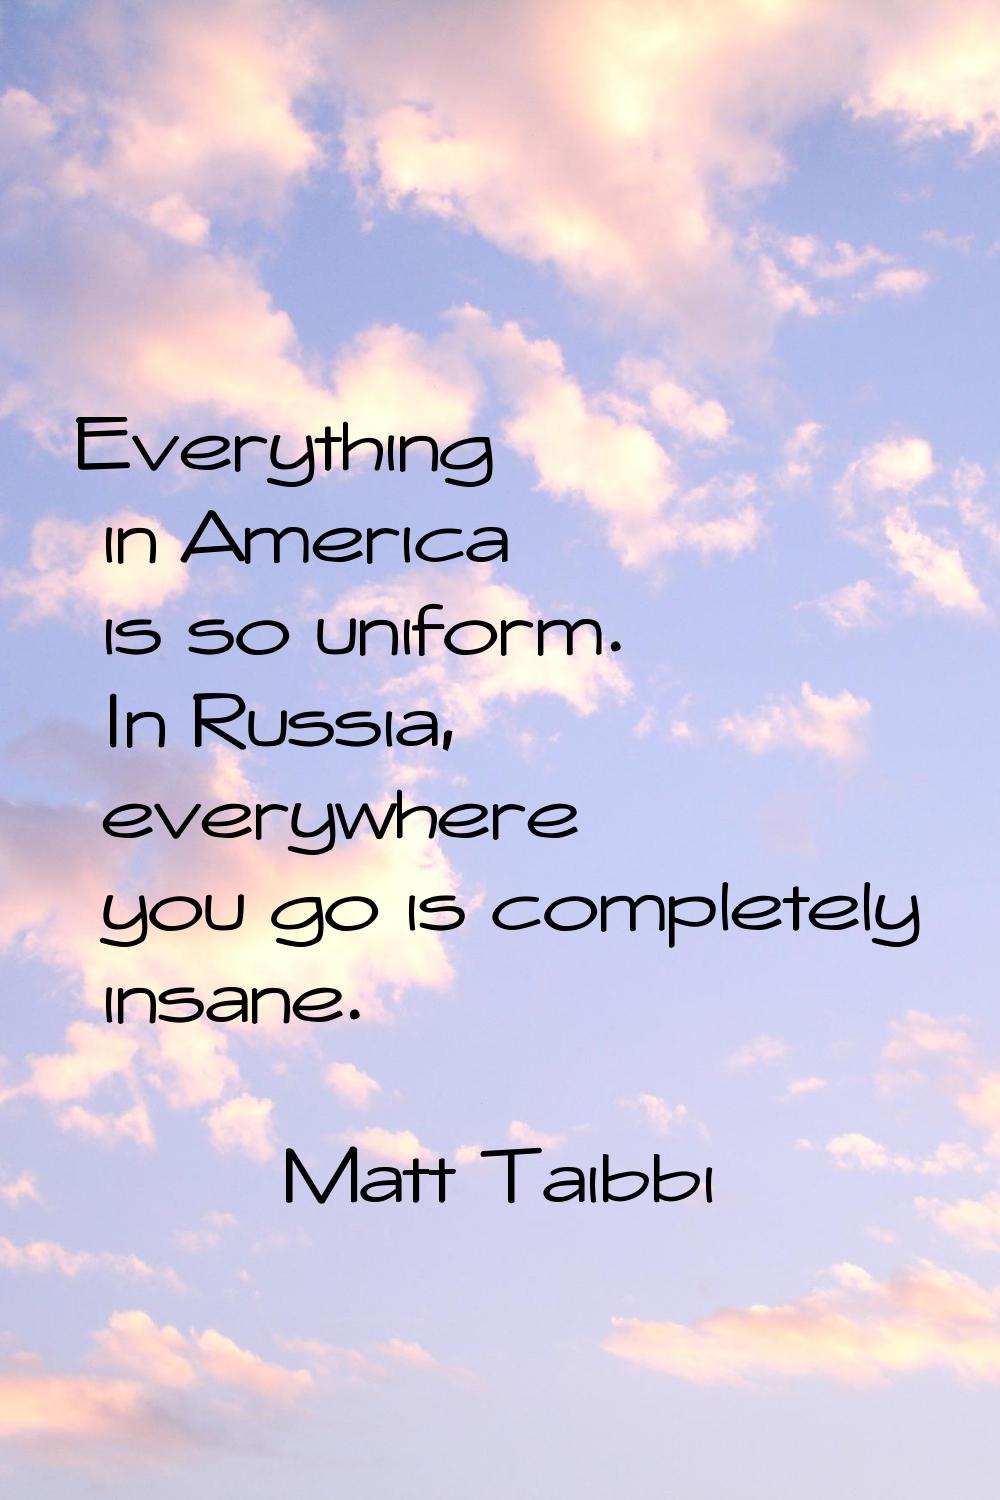 Everything in America is so uniform. In Russia, everywhere you go is completely insane.